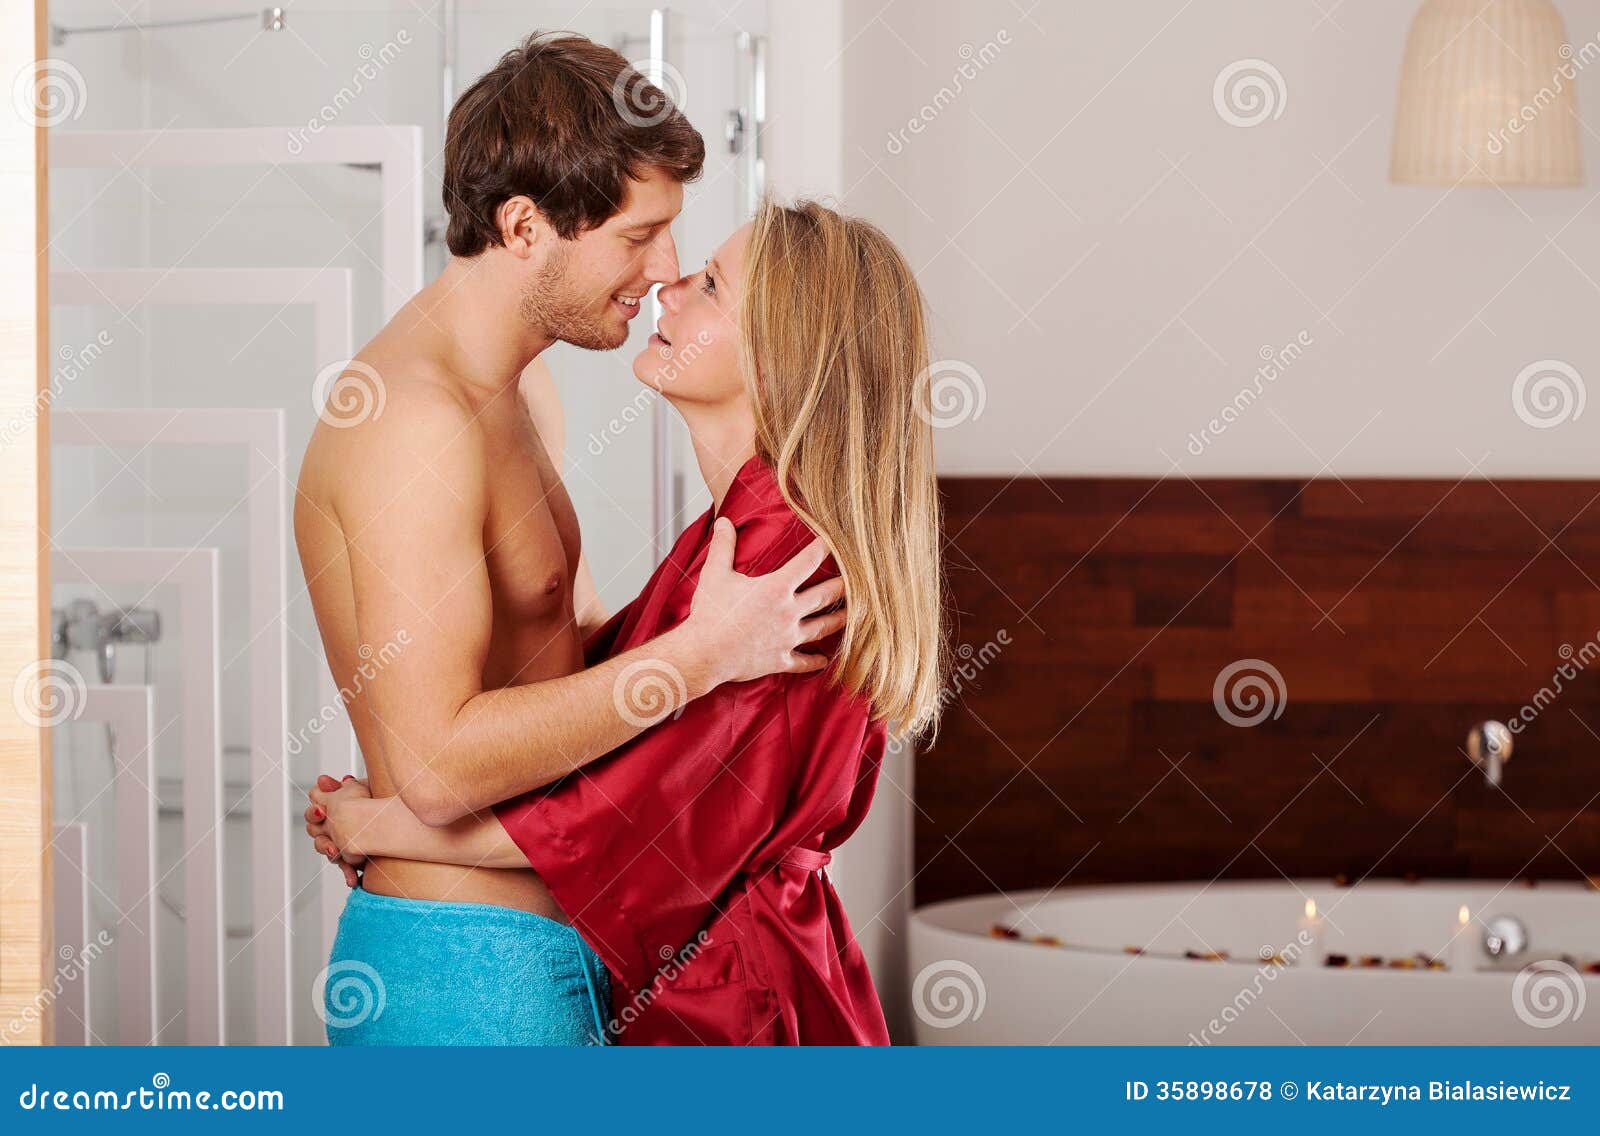 Husband and Wife in the Bathroom Stock Photo